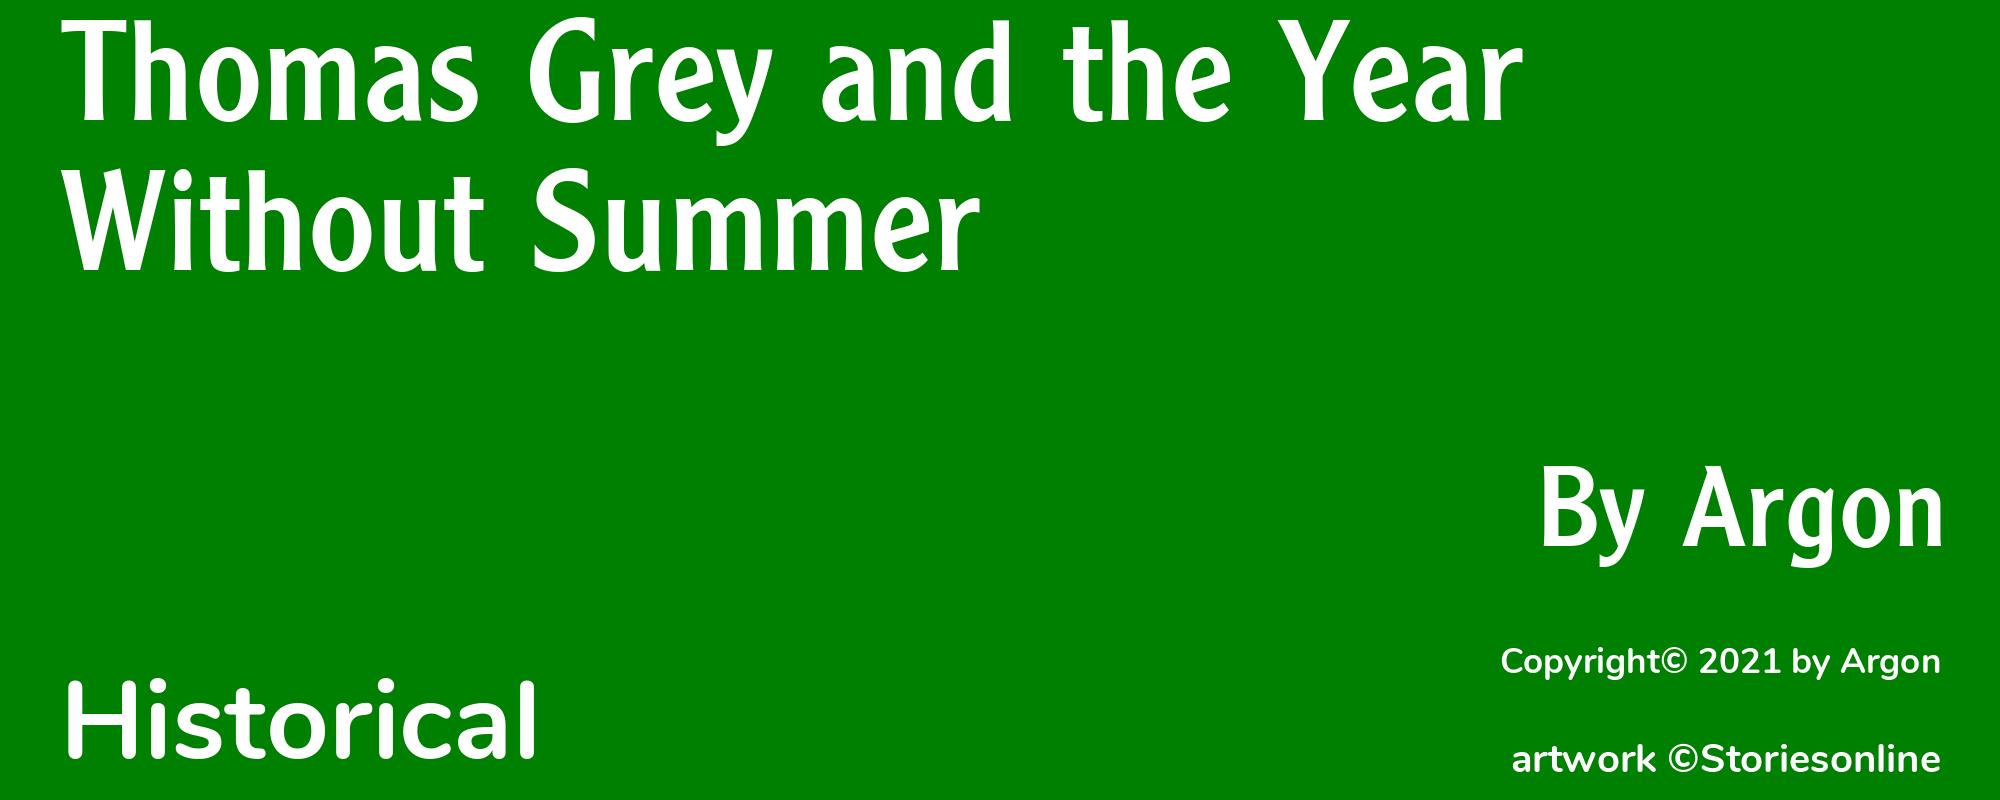 Thomas Grey and the Year Without Summer - Cover